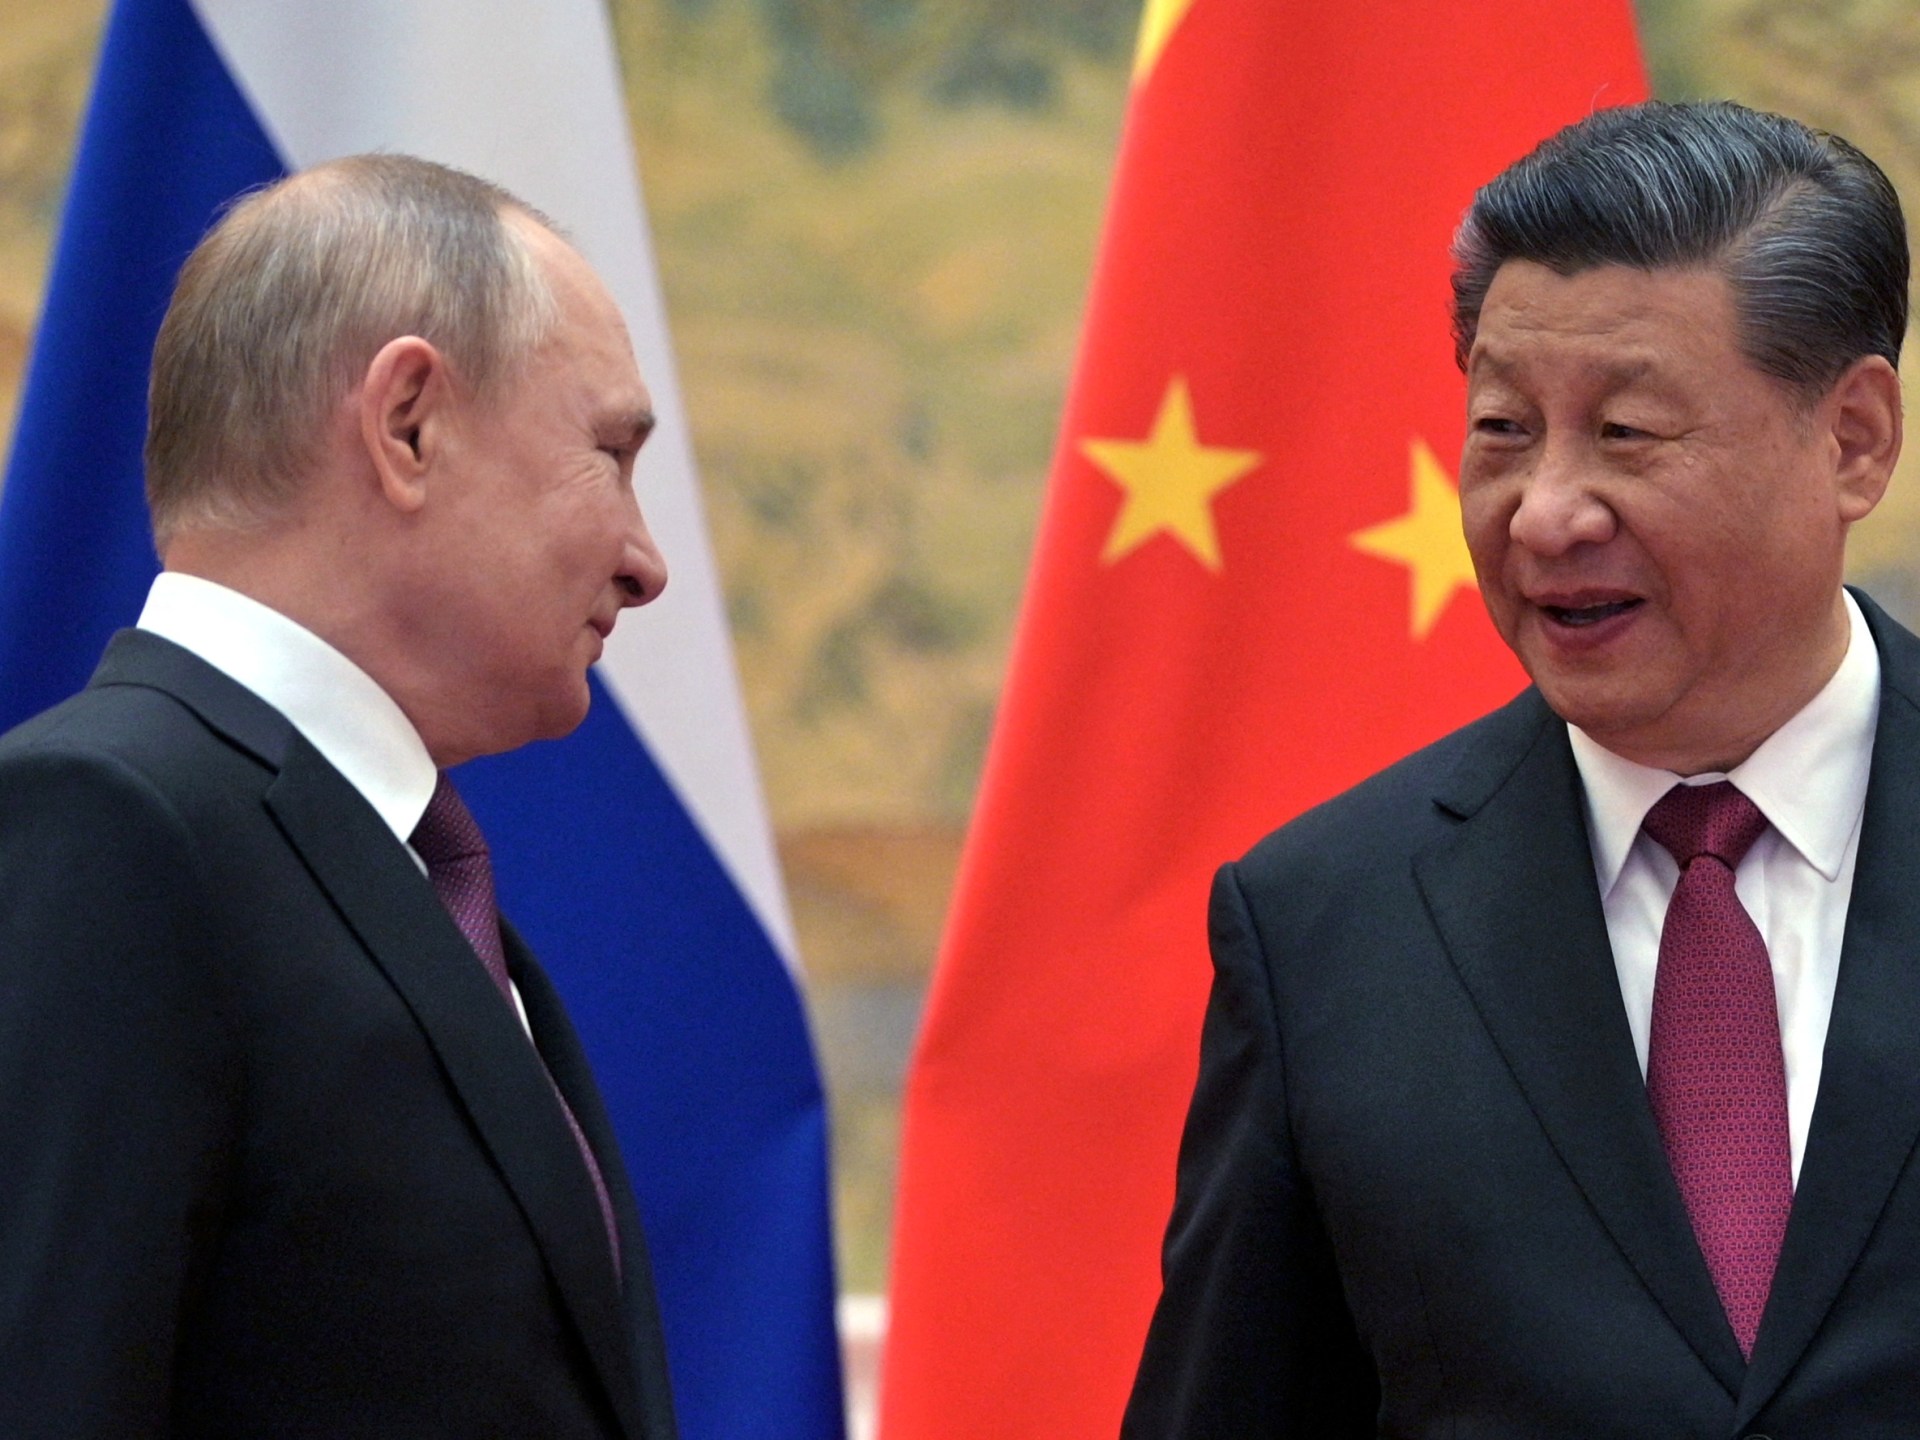 How far can China and Russia’s ‘no limits’ partnership go?